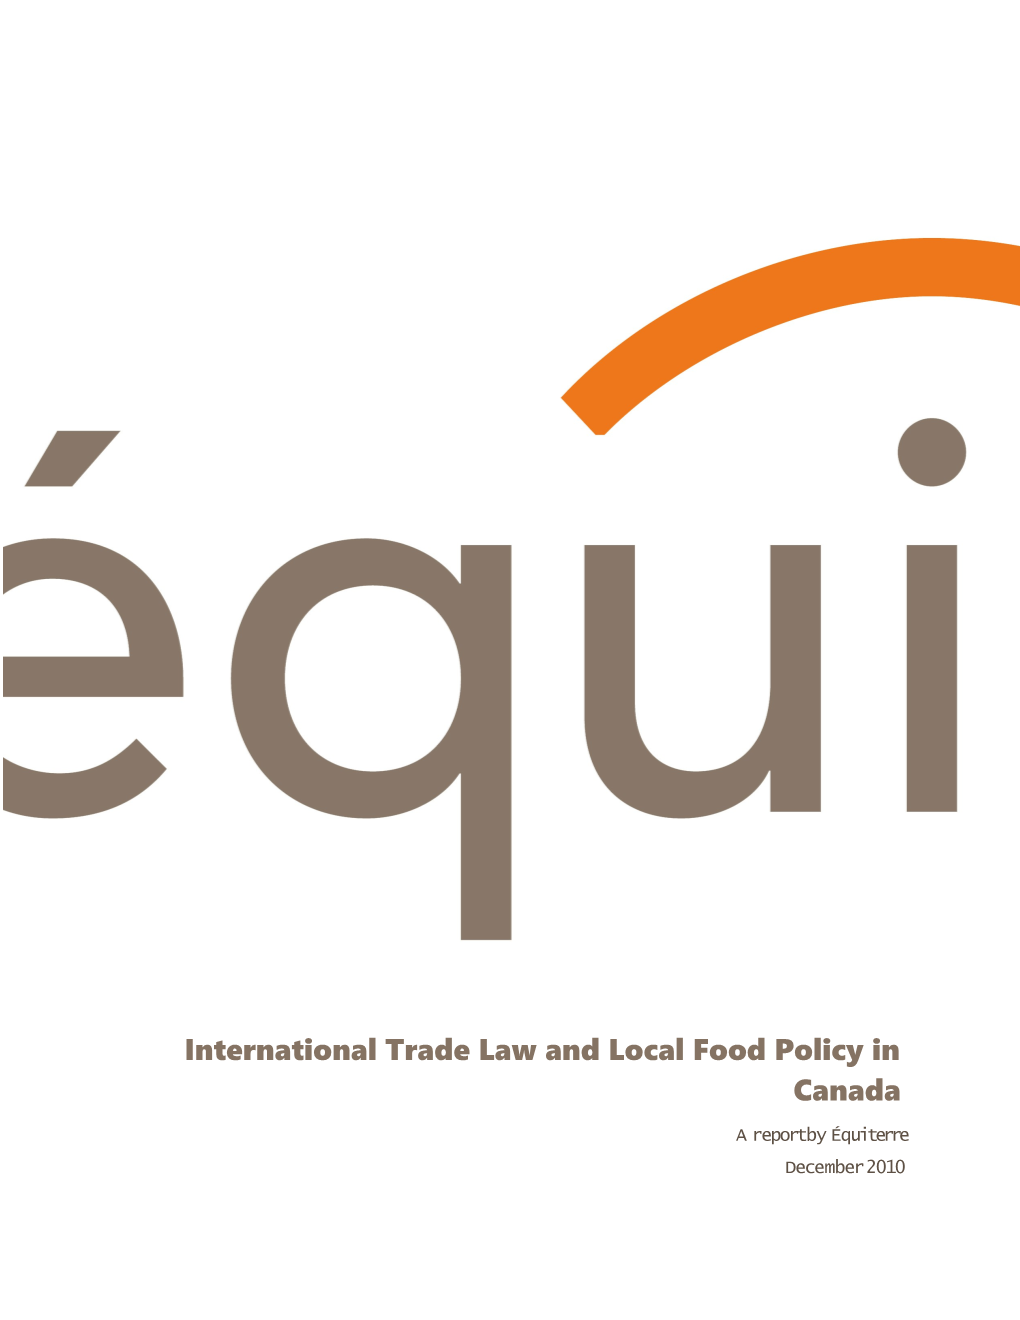 International Trade Law and Local Food Policy in Canada